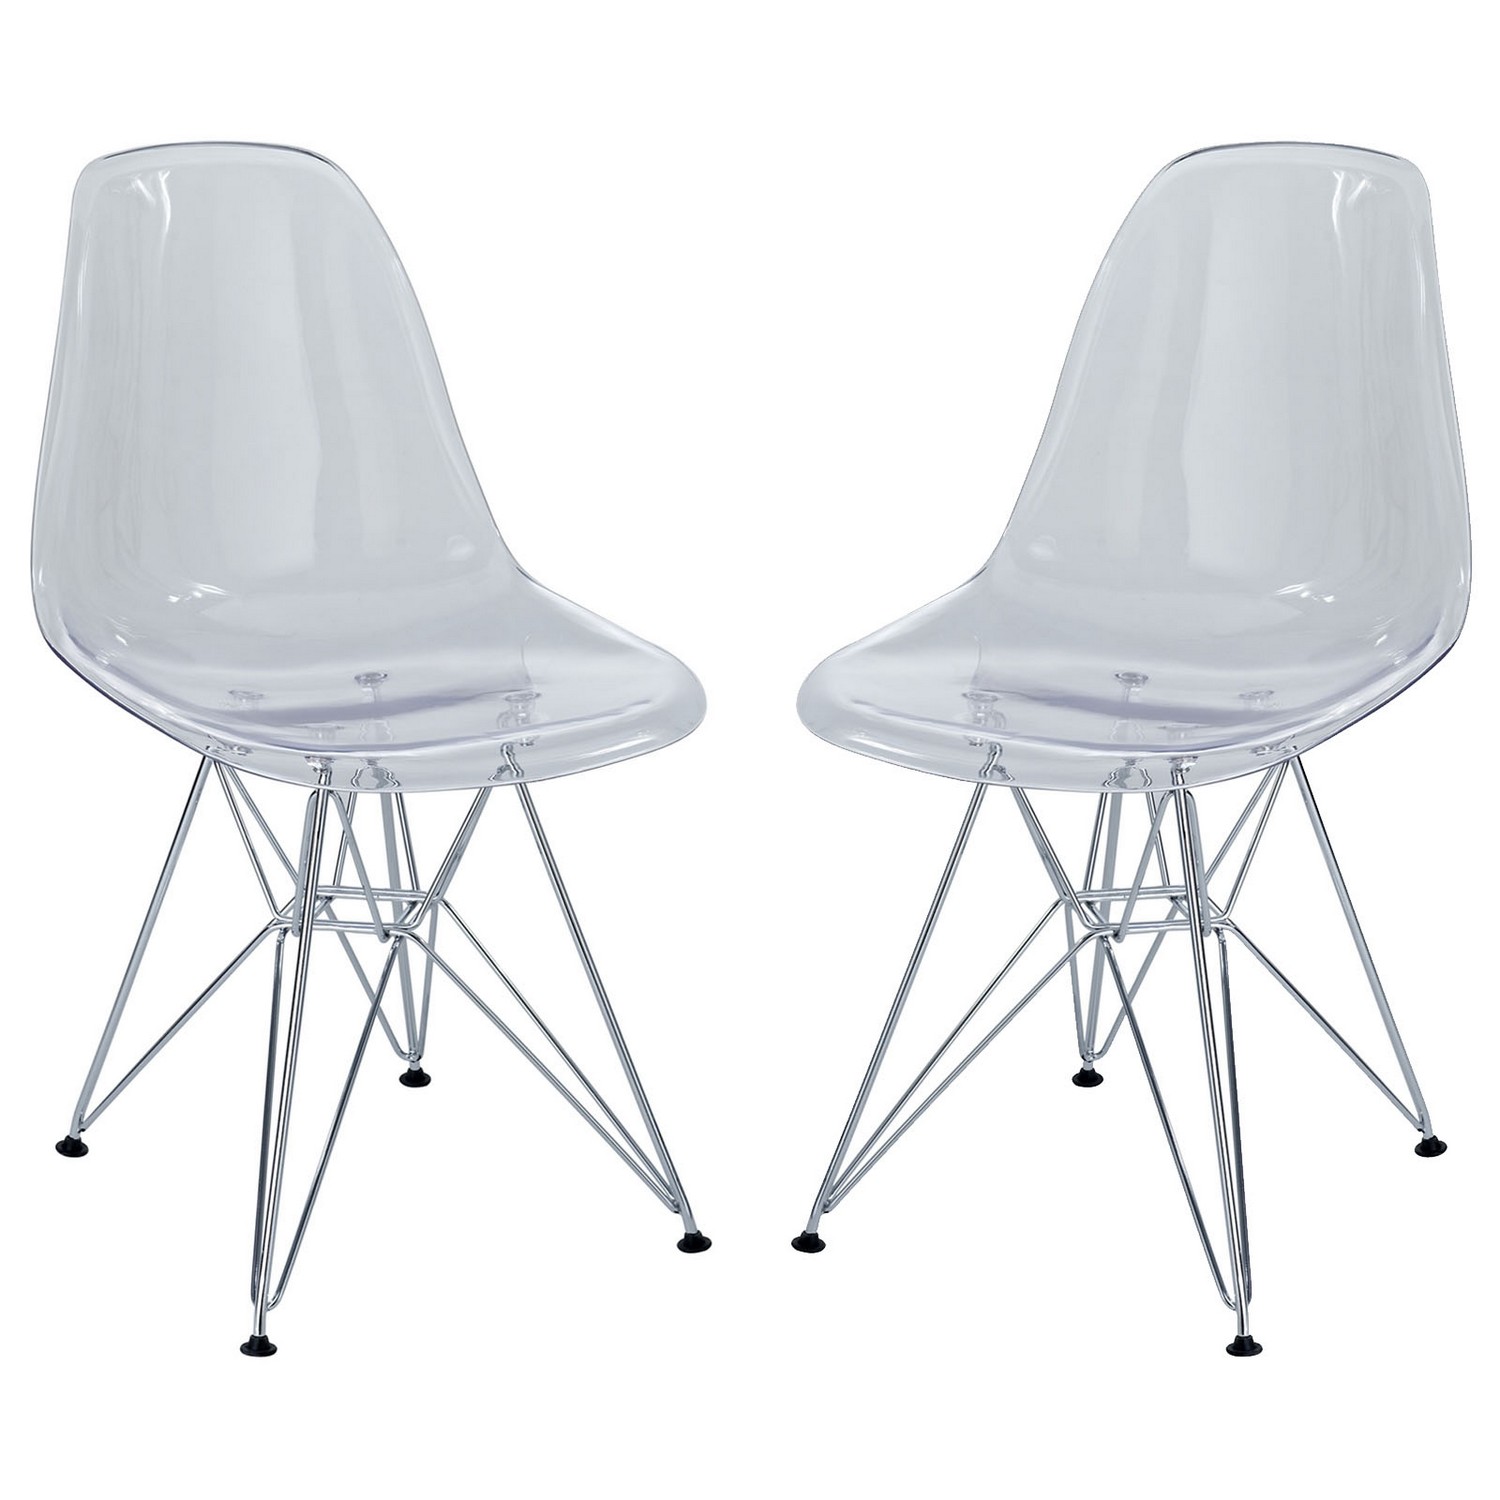 Modway Paris Dining Side Chair Set of 2 - Clear